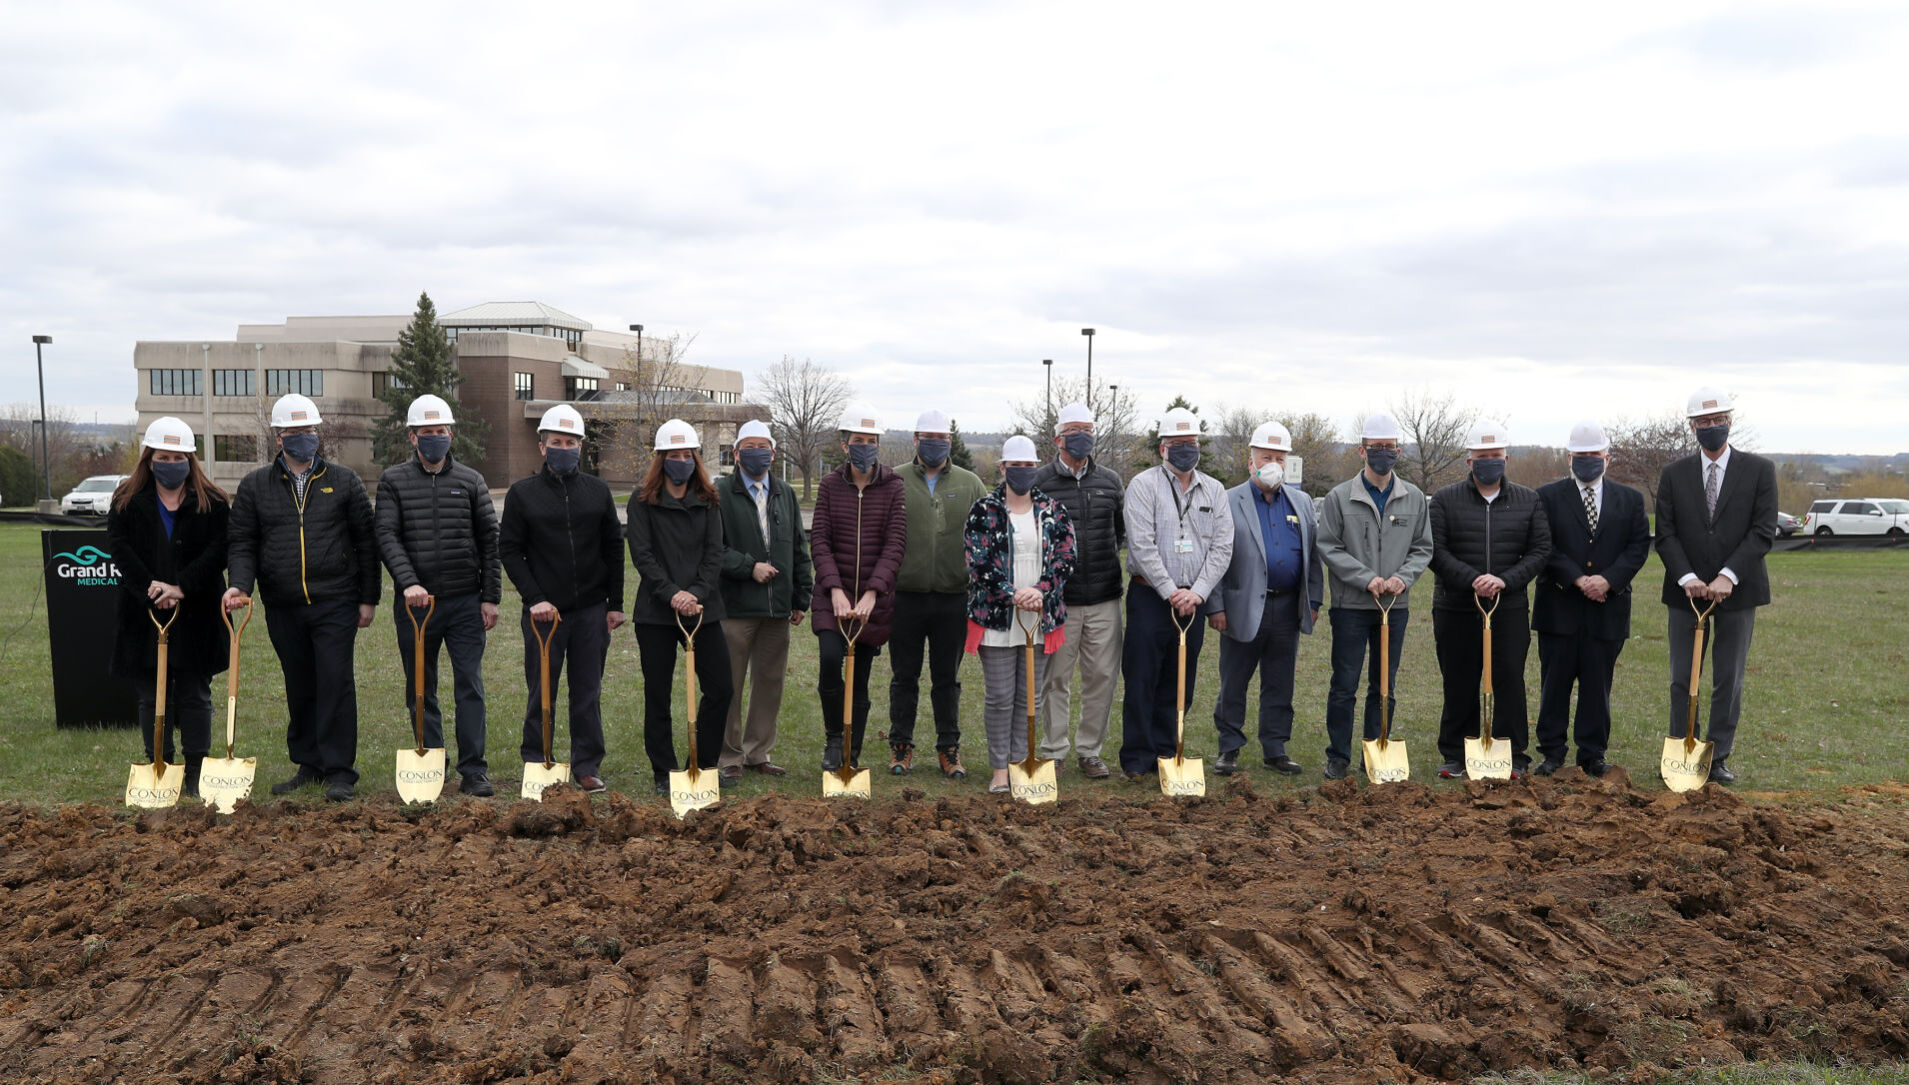 Groundbreaking for the new Grand River Medical building on Westmark Drive in Dubuque on Thursday, April 15, 2021. PHOTO CREDIT: Stephen Gassman